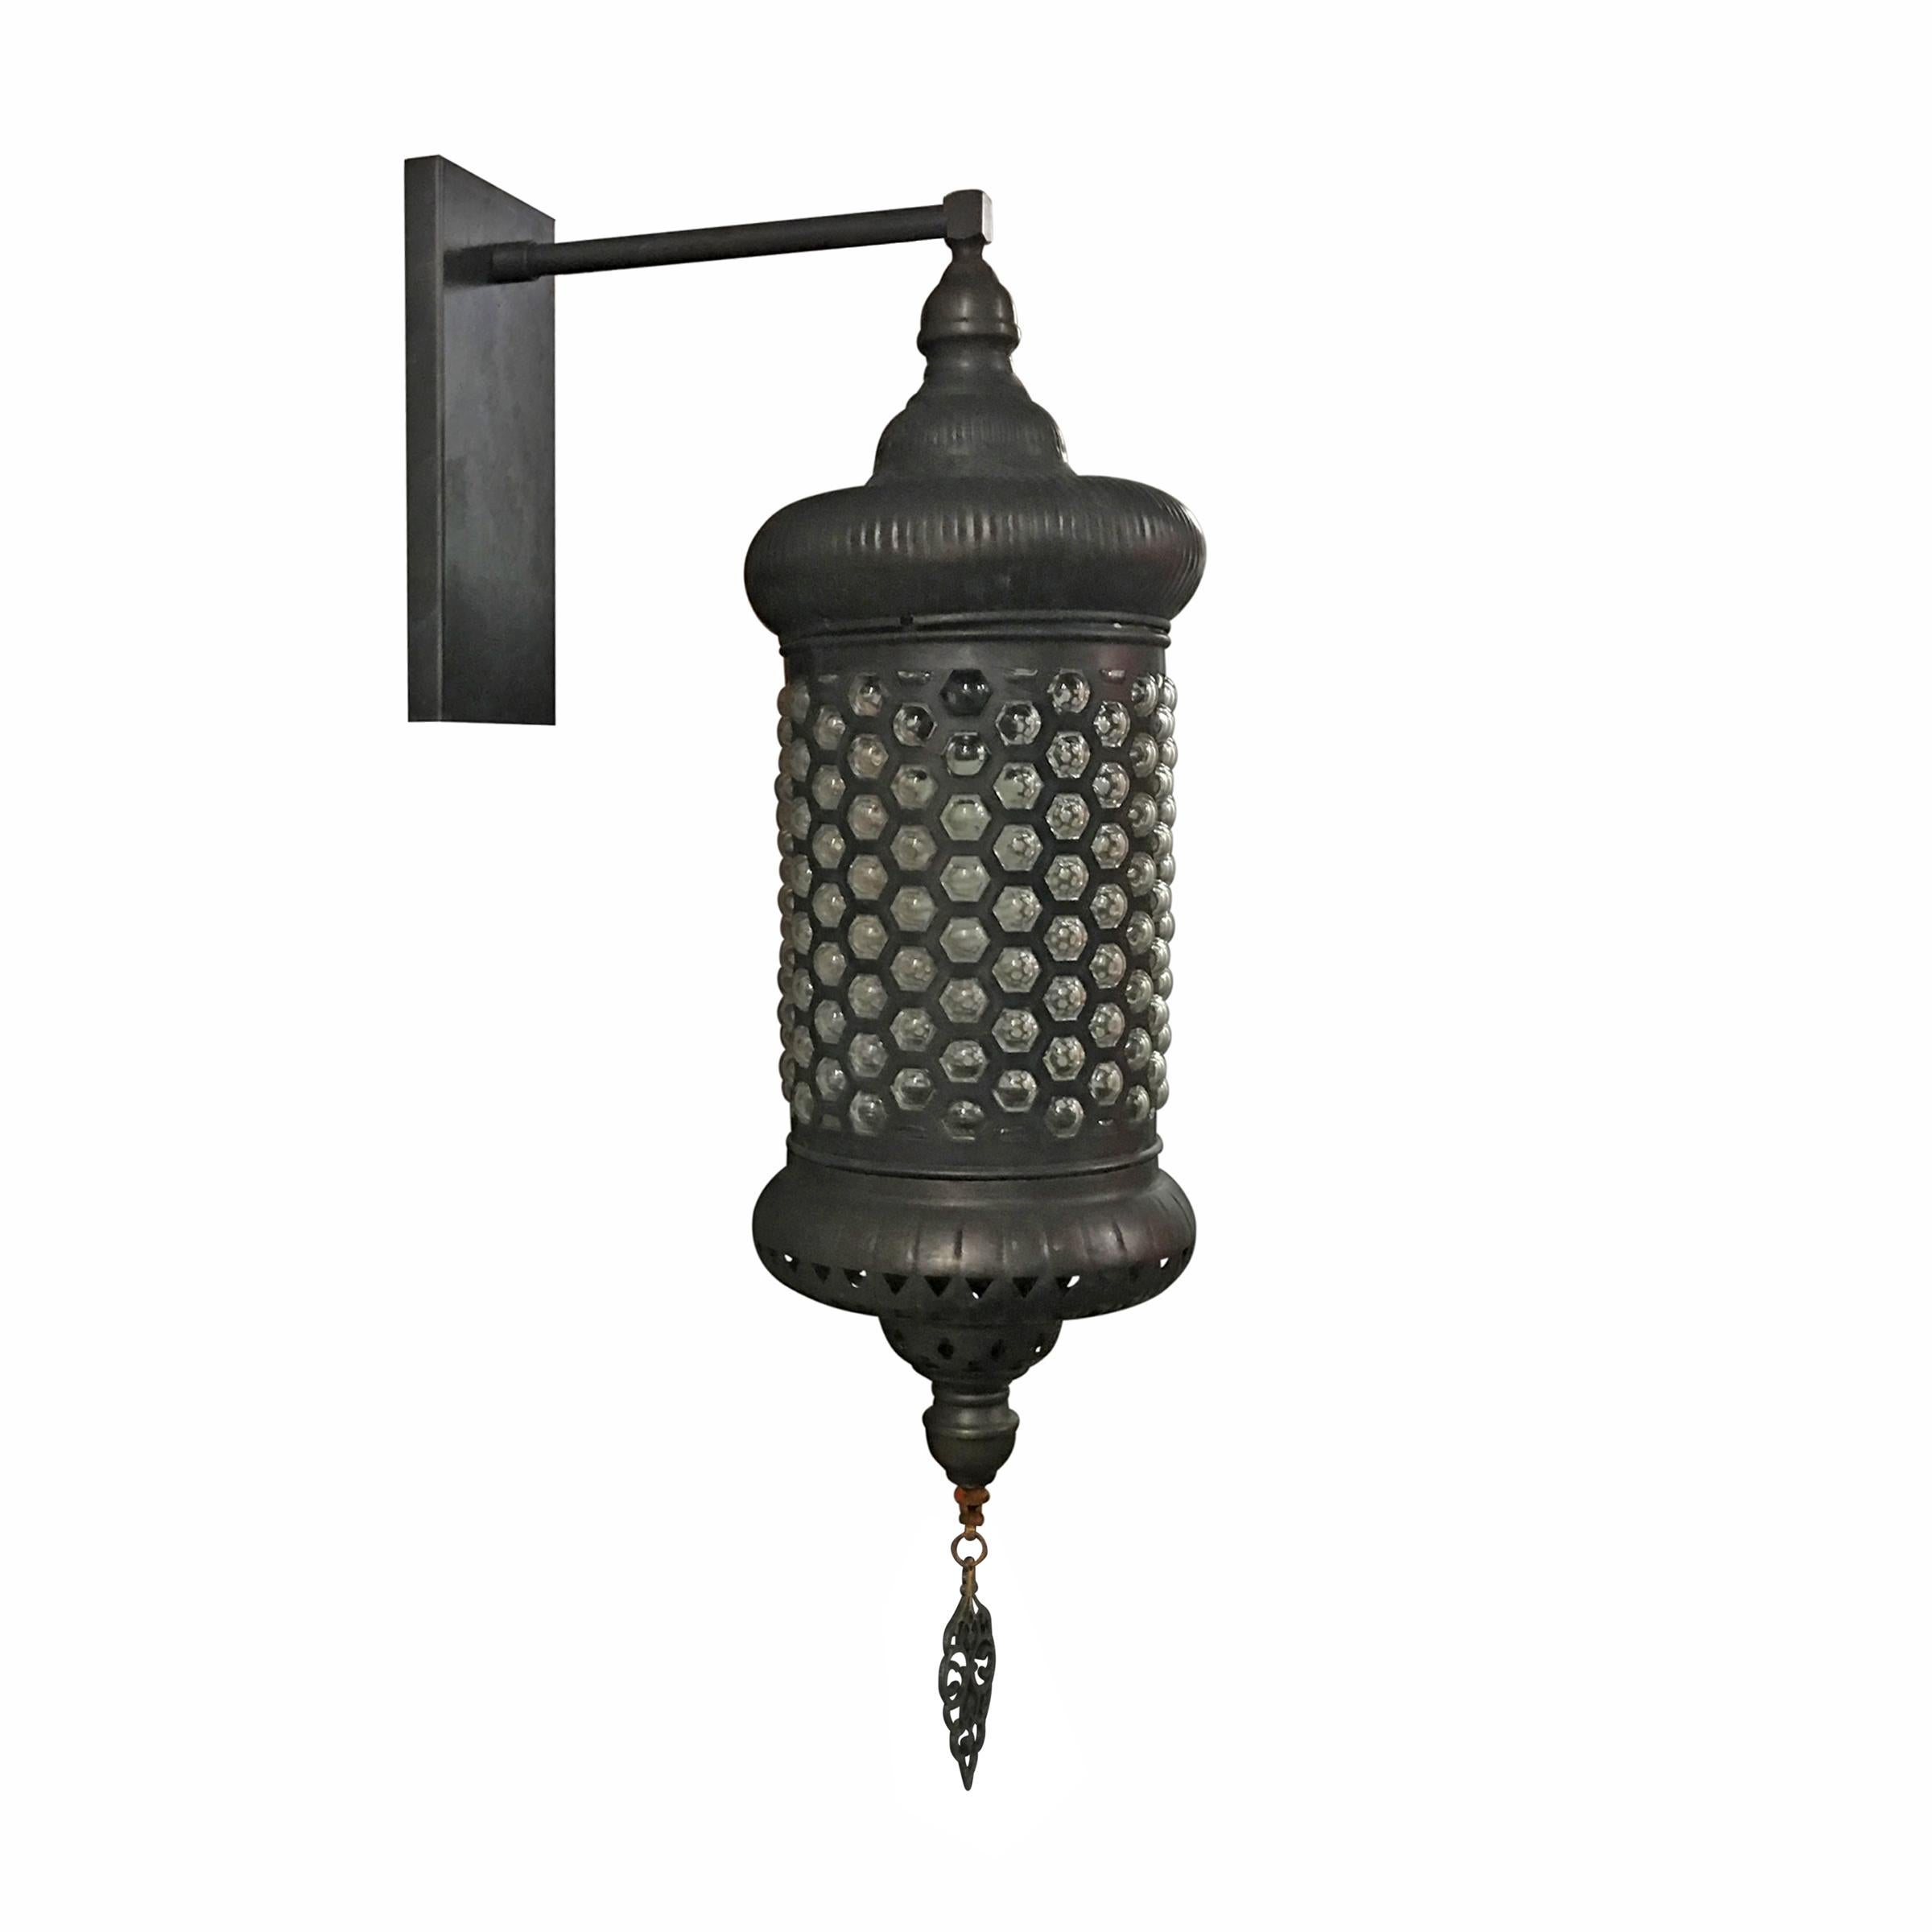 An incredible set of six Turkish rolled steel lantern-form sconces with hand blown bubble glass shades, each with a metal cartouche hanging from the bottom. These sconces were once installed in an outdoor courtyard and have a wonderful patinated